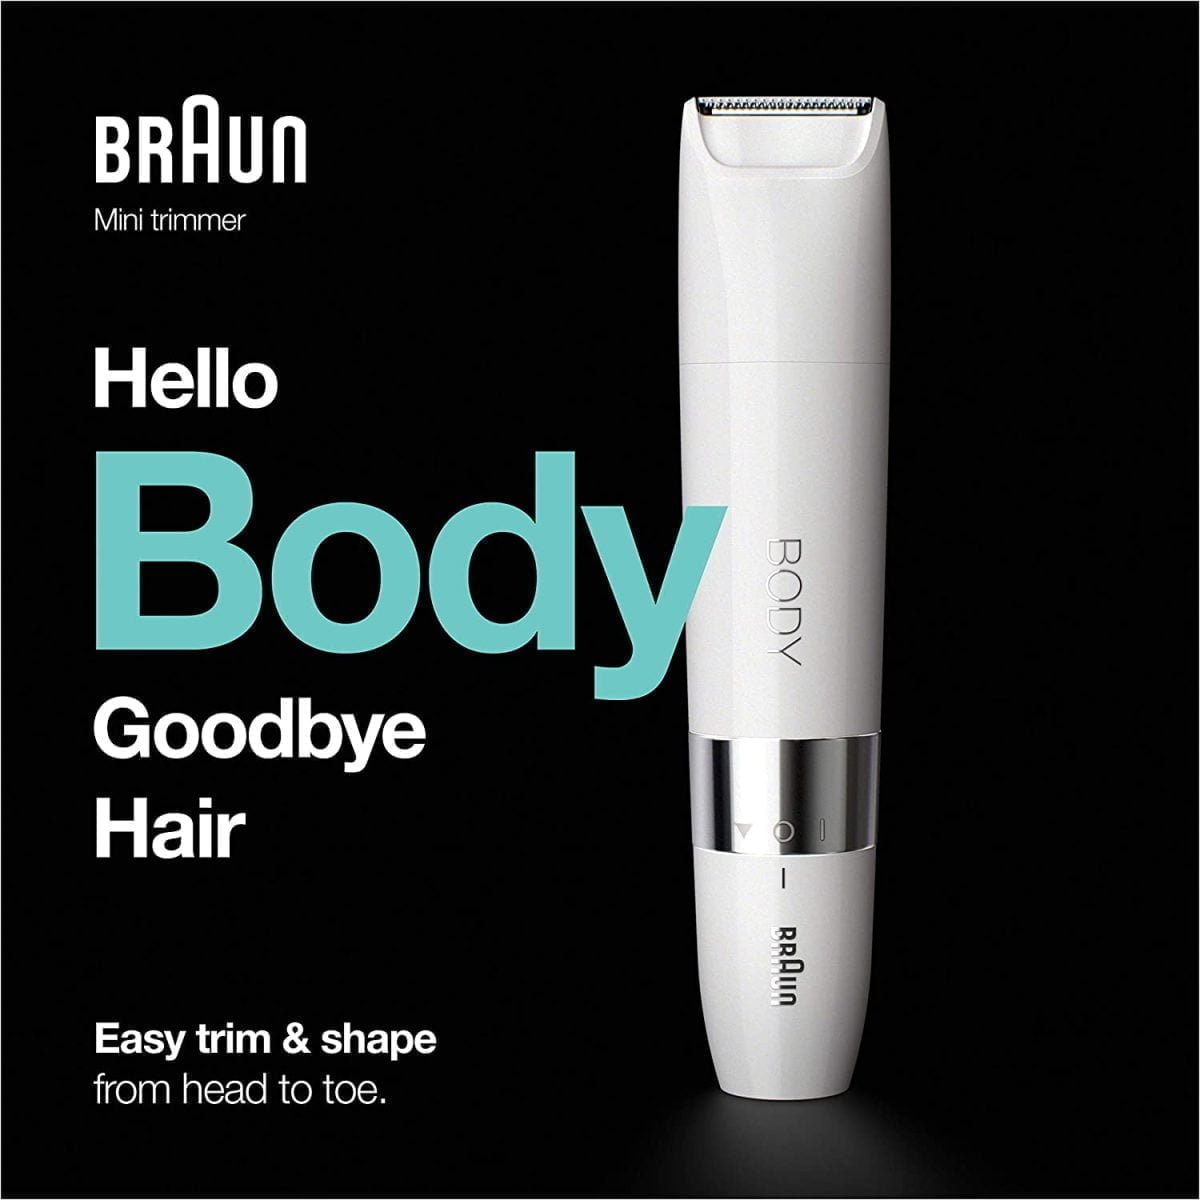 71Upn3Gz5Ol. Ac Sl1500 Braun &Lt;H1&Gt;Braun Body Mini Trimmer Bs1000, Electric Body Hair Removal For Women And Men, White&Lt;/H1&Gt; Https://Www.youtube.com/Watch?V=Z_Ryfvobyaw &Lt;Ul Class=&Quot;A-Unordered-List A-Vertical A-Spacing-Mini&Quot;&Gt; &Lt;Li&Gt;&Lt;Span Class=&Quot;A-List-Item&Quot;&Gt; Quick &Amp; Easy: Mini-Sized For Portability - Efficient Body Hair Removal &Lt;/Span&Gt;&Lt;/Li&Gt; &Lt;Li&Gt;&Lt;Span Class=&Quot;A-List-Item&Quot;&Gt; Gentle &Amp; Compact: Built For Efficient And Sensitive Body Hair T For Everybody &Lt;/Span&Gt;&Lt;/Li&Gt; &Lt;Li&Gt;&Lt;Span Class=&Quot;A-List-Item&Quot;&Gt; Wet &Amp; Dry: 100% Waterproof, For Use As You Prefer &Lt;/Span&Gt;&Lt;/Li&Gt; &Lt;Li&Gt;&Lt;Span Class=&Quot;A-List-Item&Quot;&Gt; Precise: German Cutting Technology For Precise Body Hair T And Shaping &Lt;/Span&Gt;&Lt;/Li&Gt; &Lt;Li&Gt;&Lt;Span Class=&Quot;A-List-Item&Quot;&Gt; Multipurpose: Usable For Hair Removal T And Shaping On Different Areas Of Your Body &Lt;/Span&Gt;&Lt;/Li&Gt; &Lt;/Ul&Gt; Body Hair Removal Braun Body Mini Trimmer Bs1000, Electric Body Hair Removal For Women And Men, White